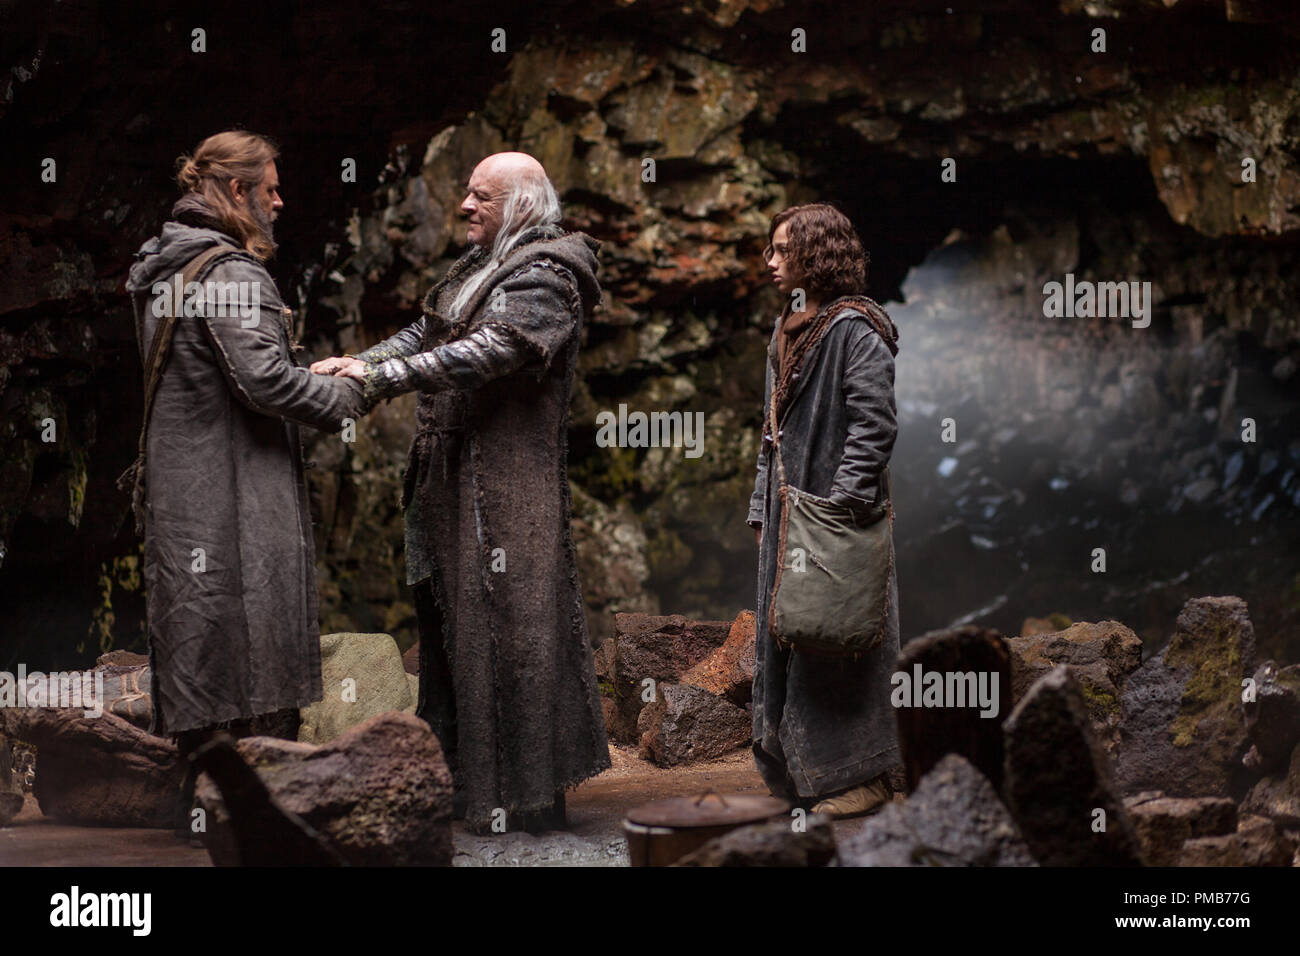 (Left to right) Russell Crowe is Noah, Anthony Hopkins is Methuselah and Gavin Casalegno is Young Shem in NOAH, from Paramount Pictures and Regency Enterprises. N-12020 Stock Photo